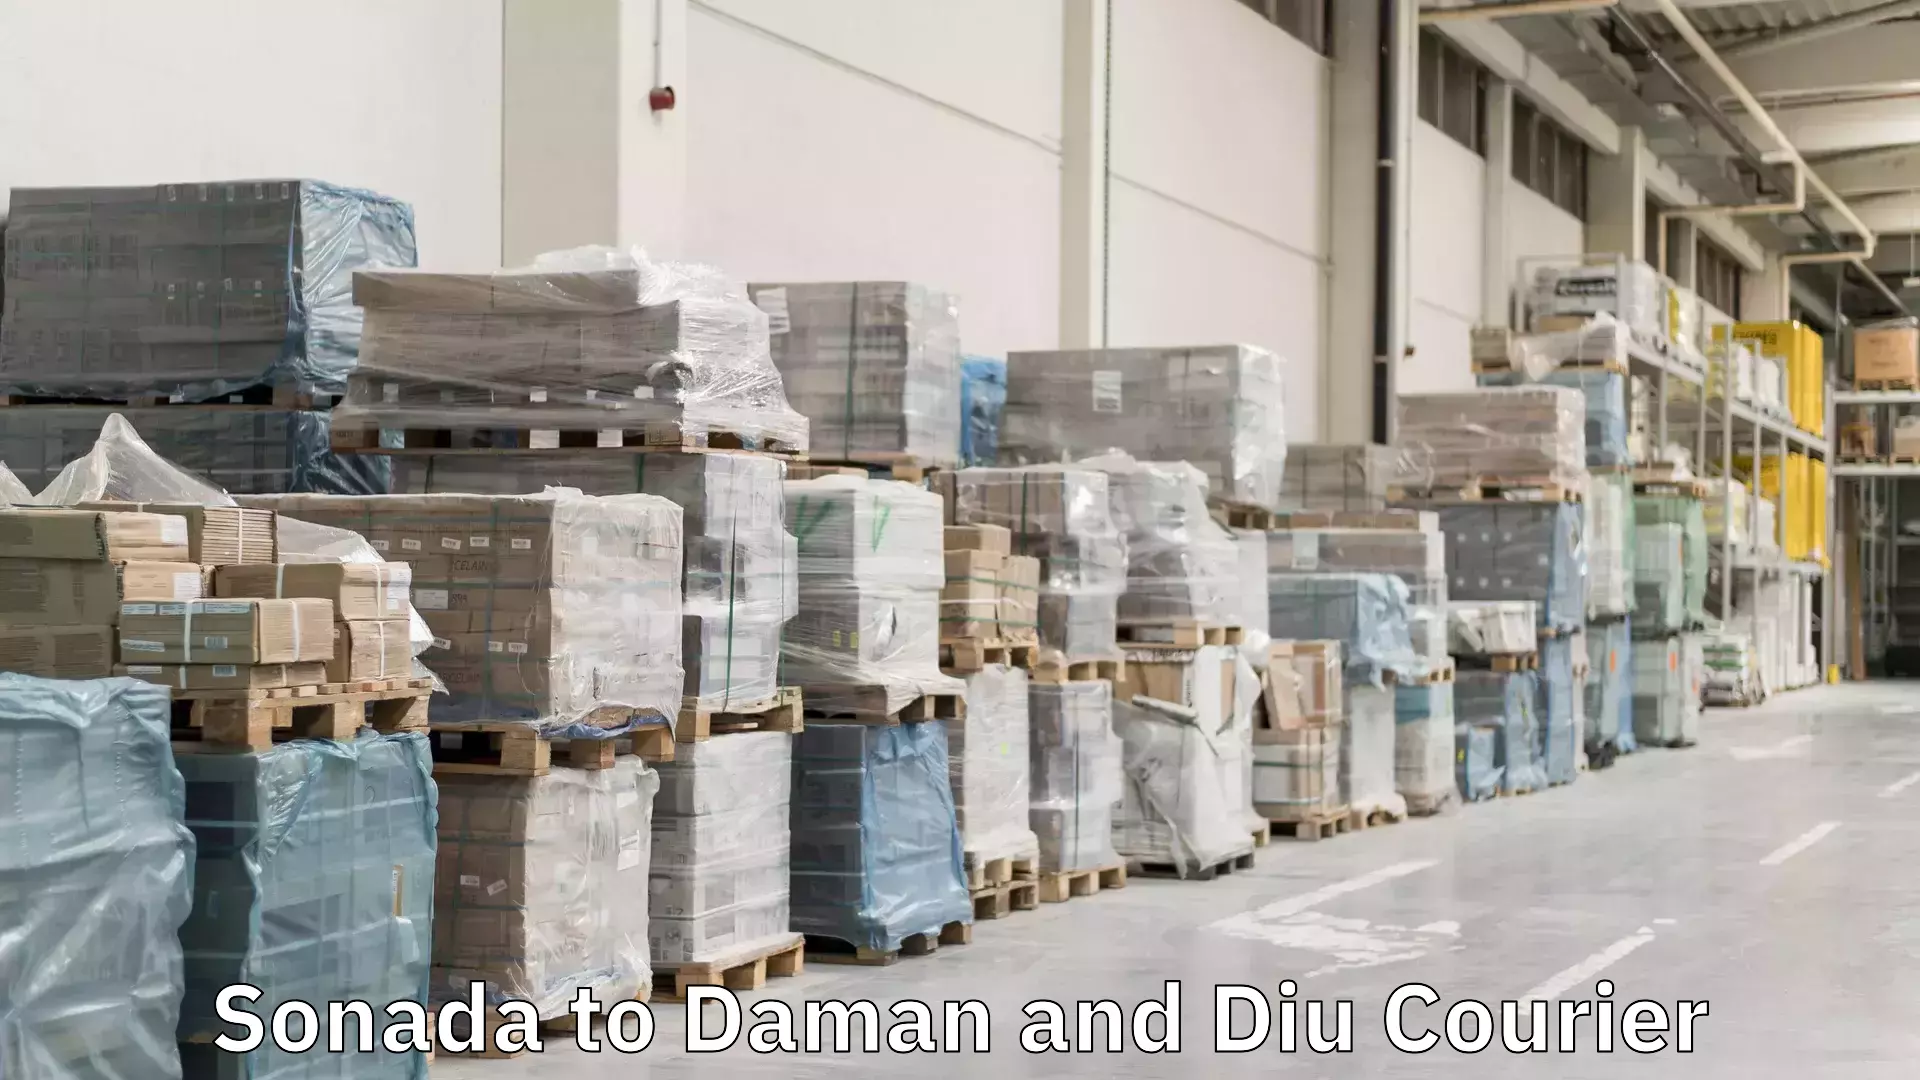 Reliable parcel services Sonada to Daman and Diu